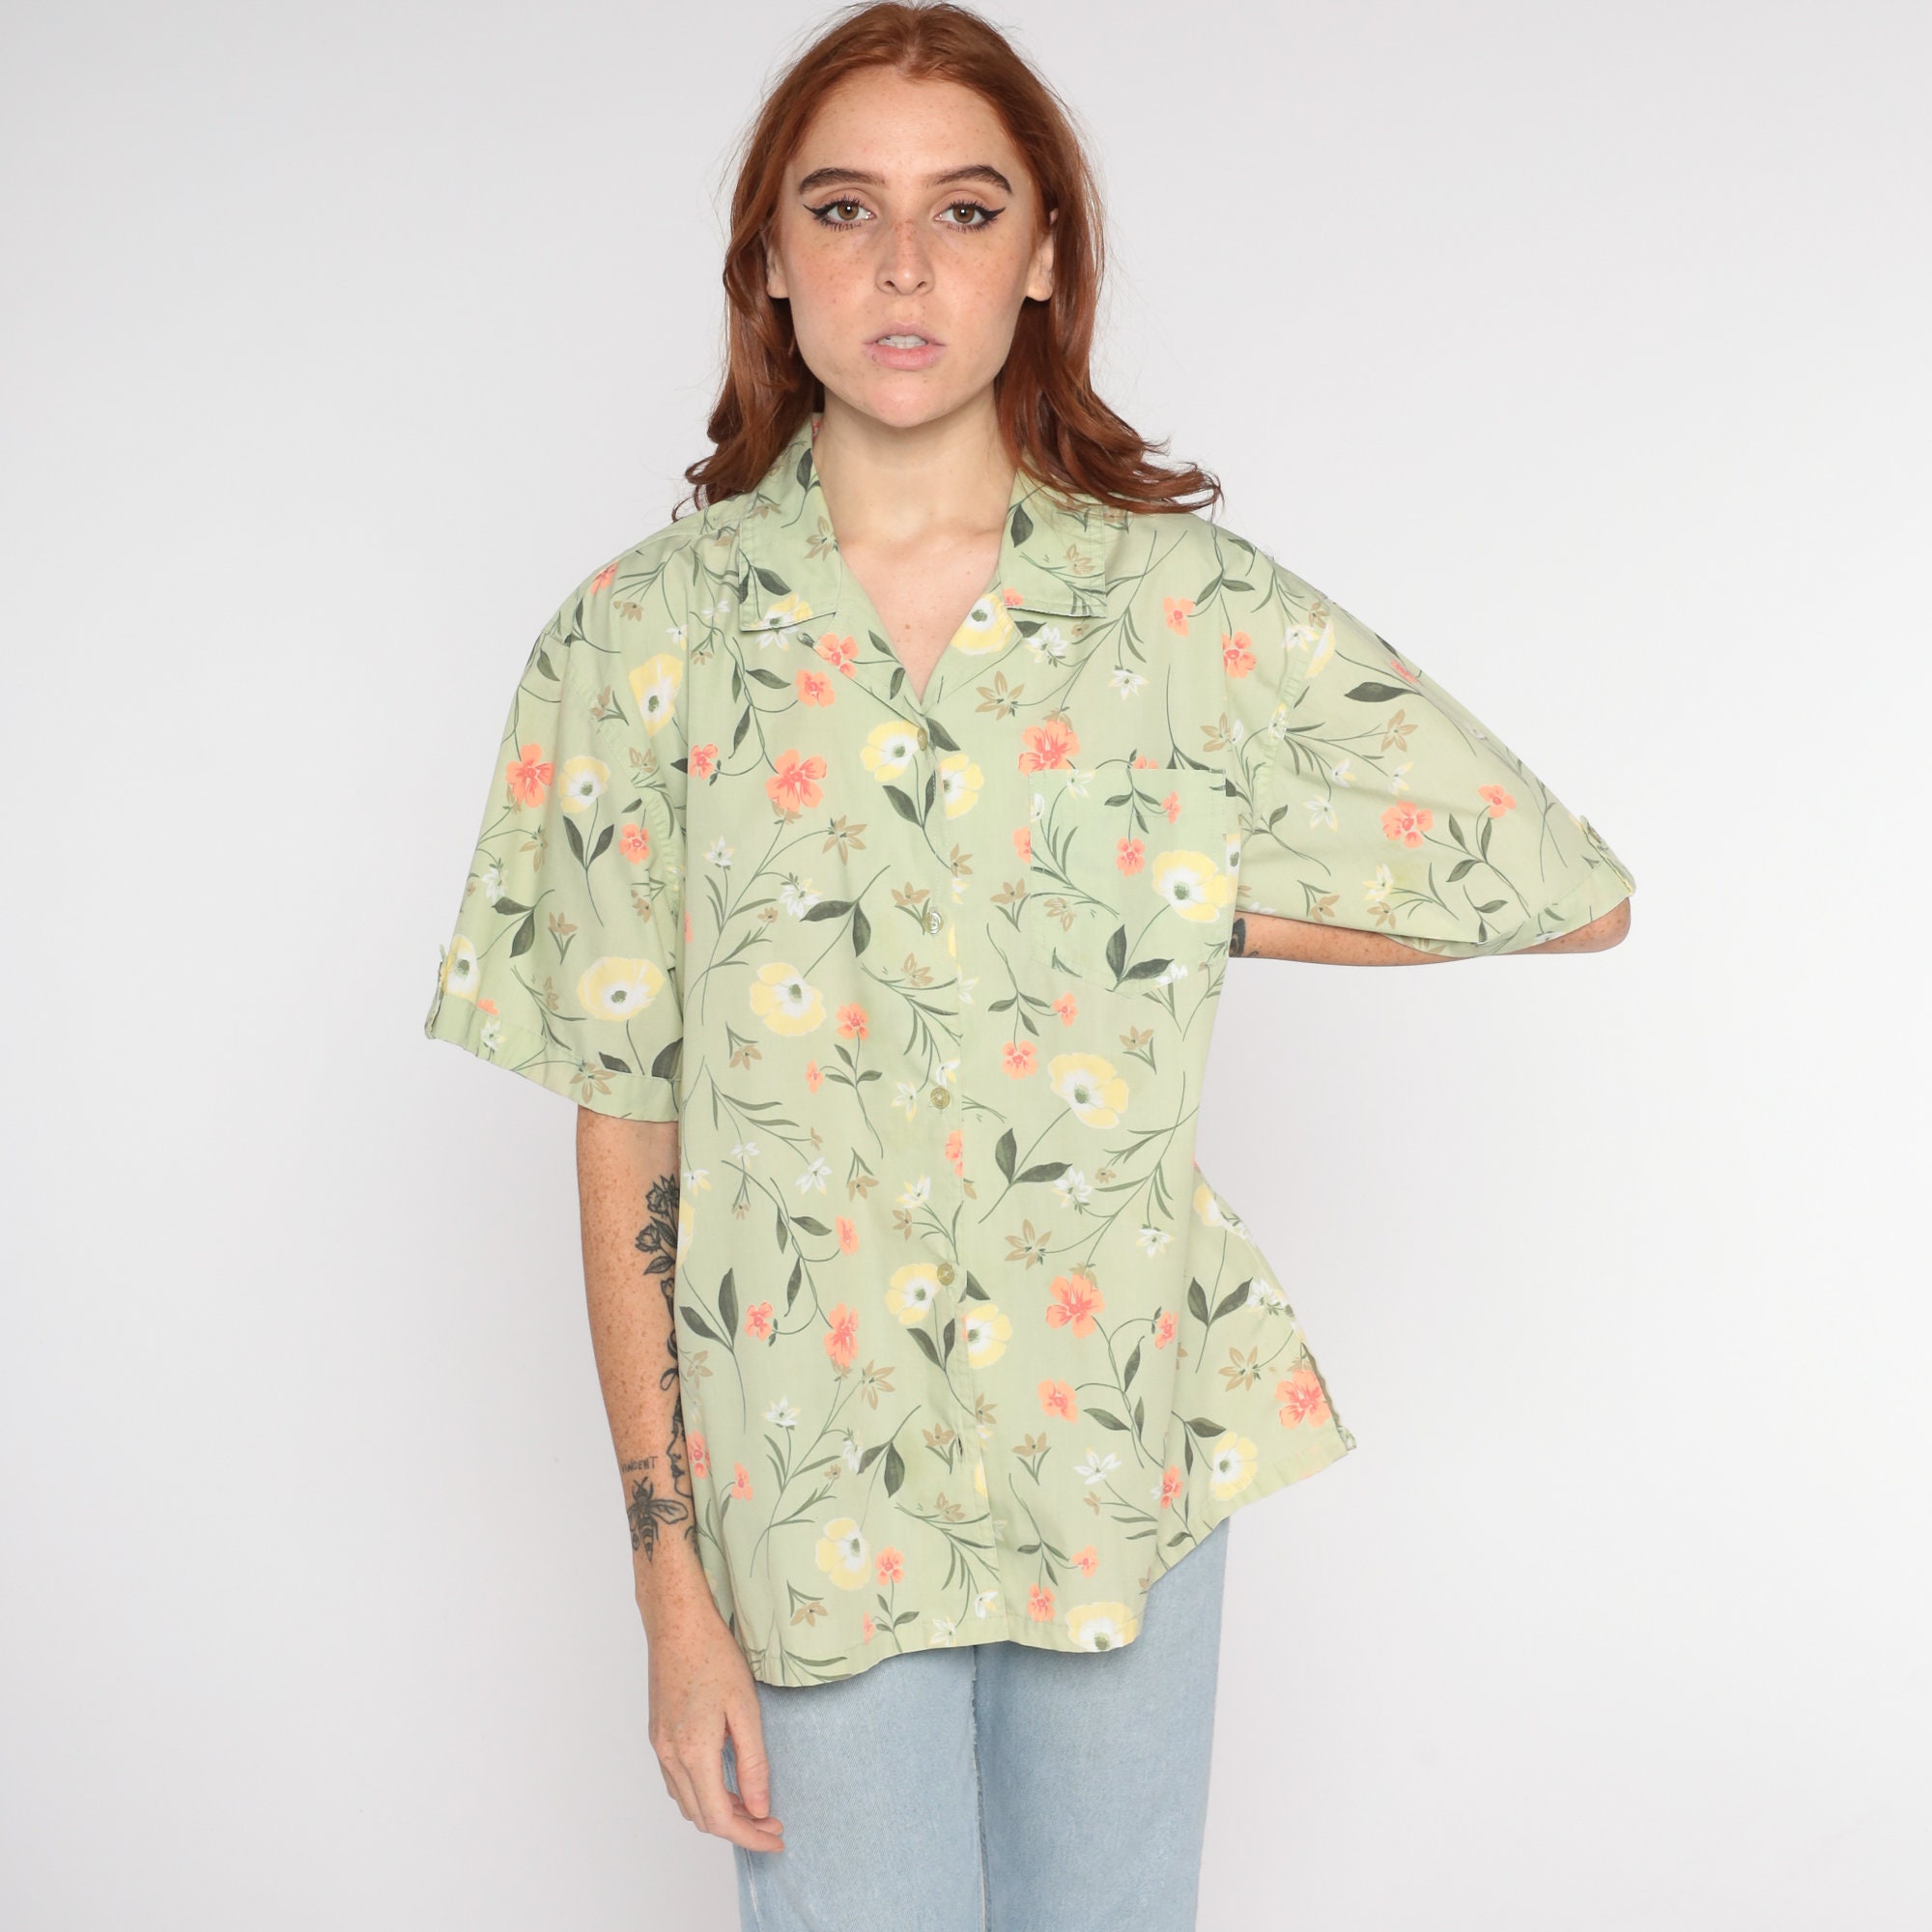 Green Floral Top Y2K Button Up Shirt Retro Girly Short Sleeve Blouse ...